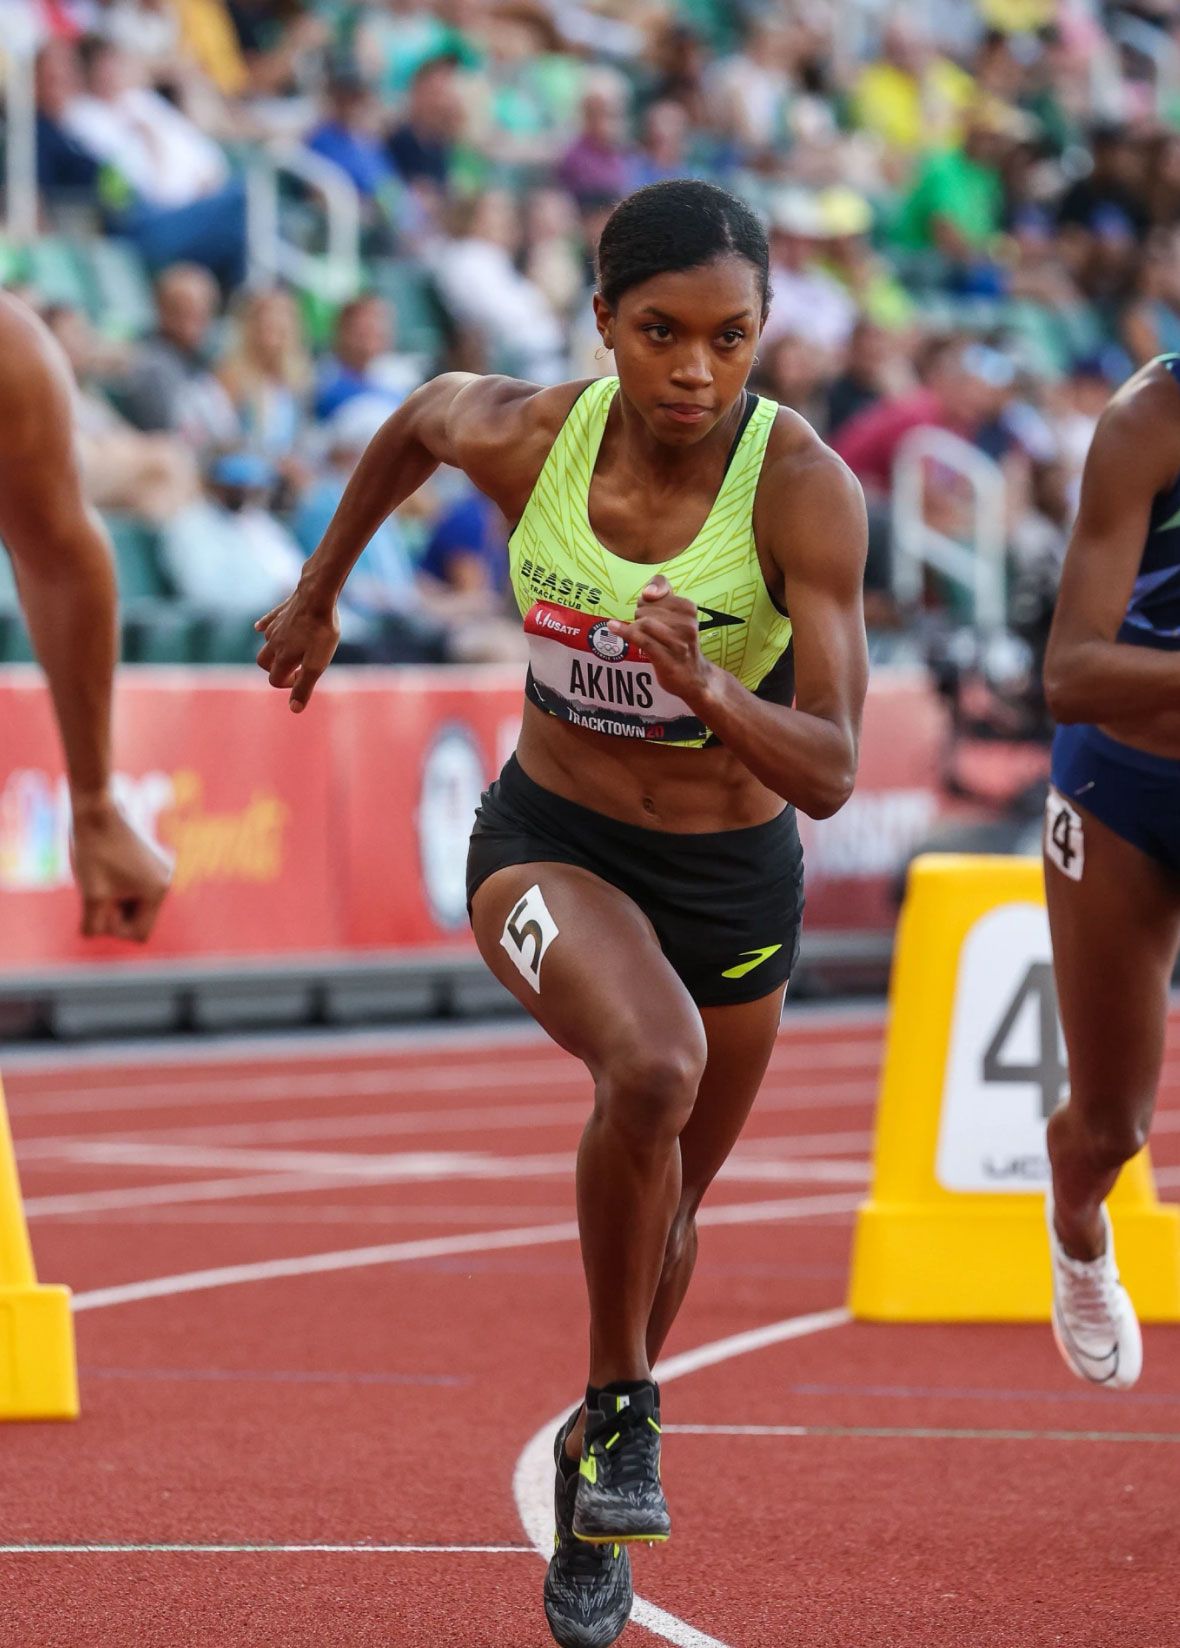 2021 Tokyo Olympics - Raevyn Rogers Relying on Psychology Faith to